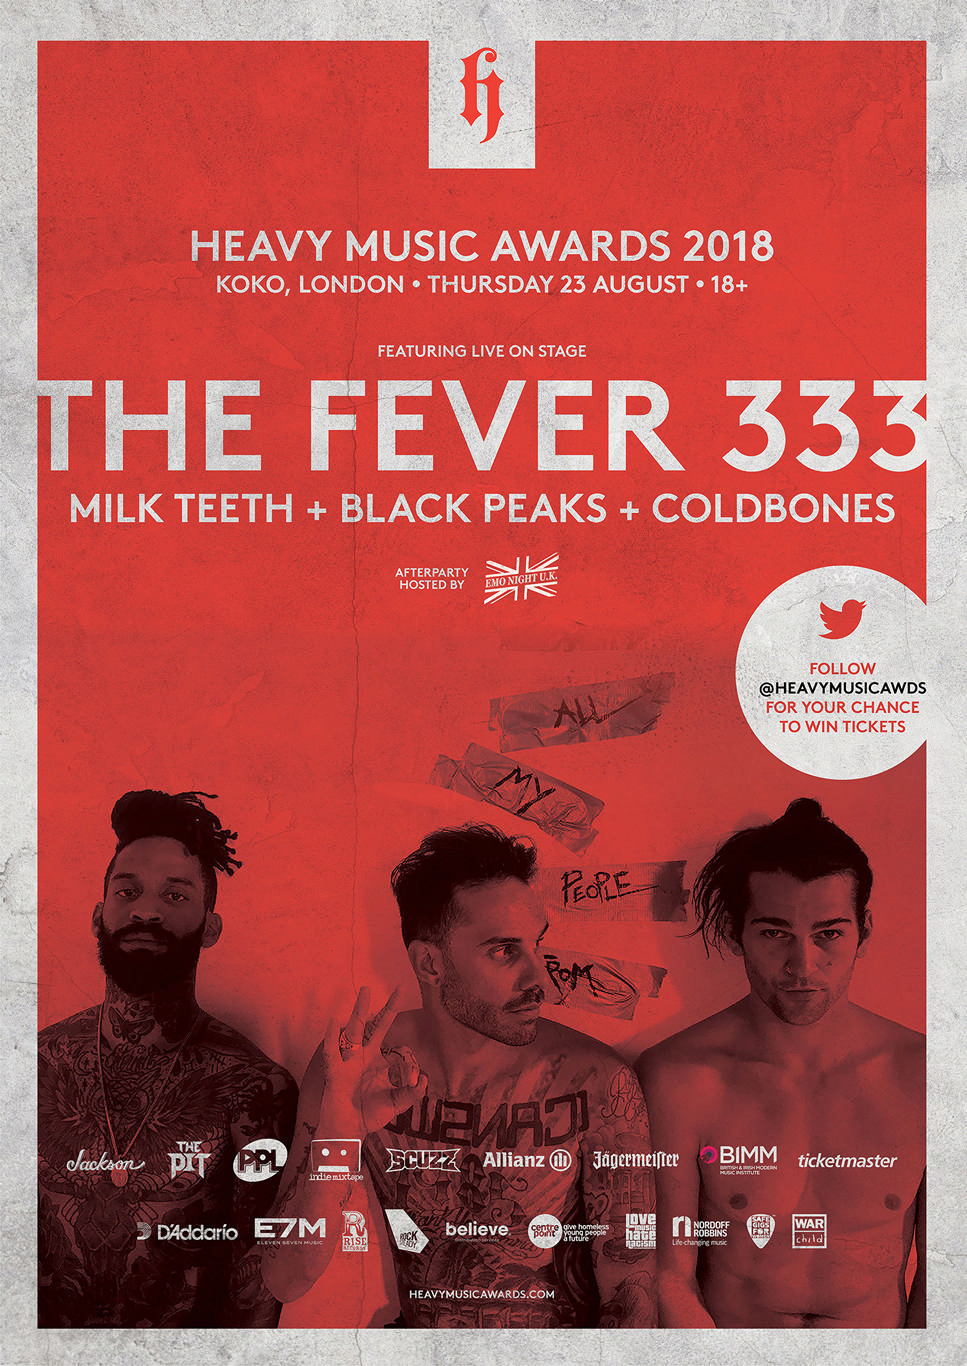 Heavy Music Awards announces 2018 ceremony house bands!